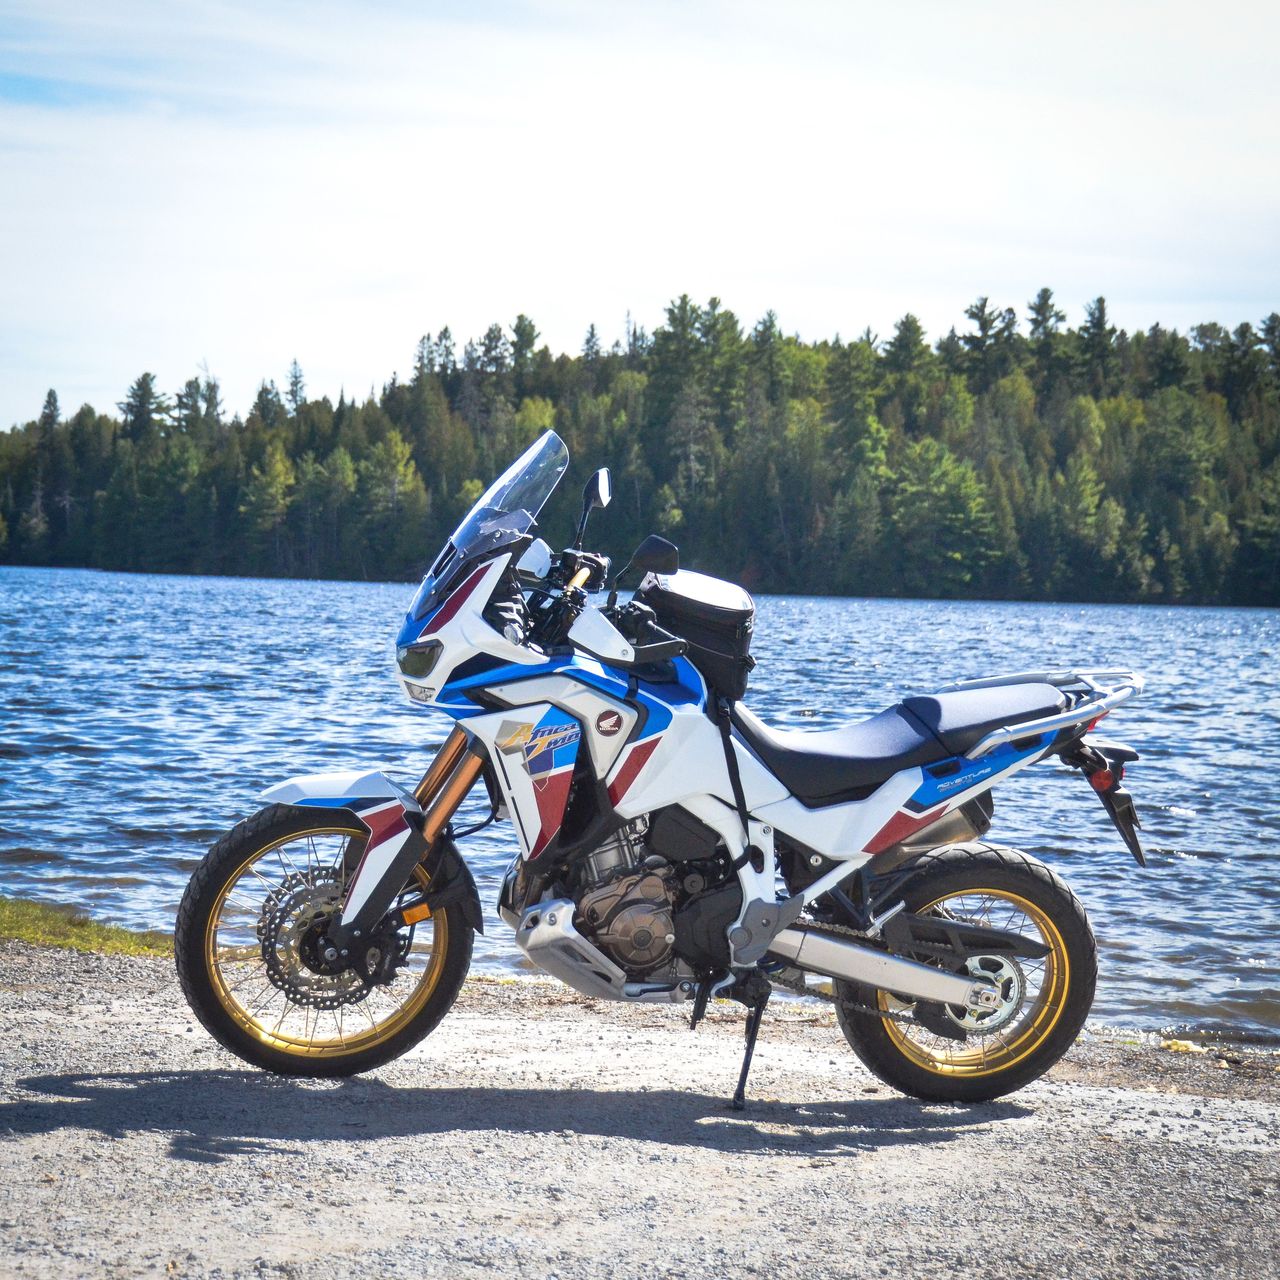 2021 Honda Africa Twin CRF1100 Adventure Sports DCT: the do everything, go anywhere bike .